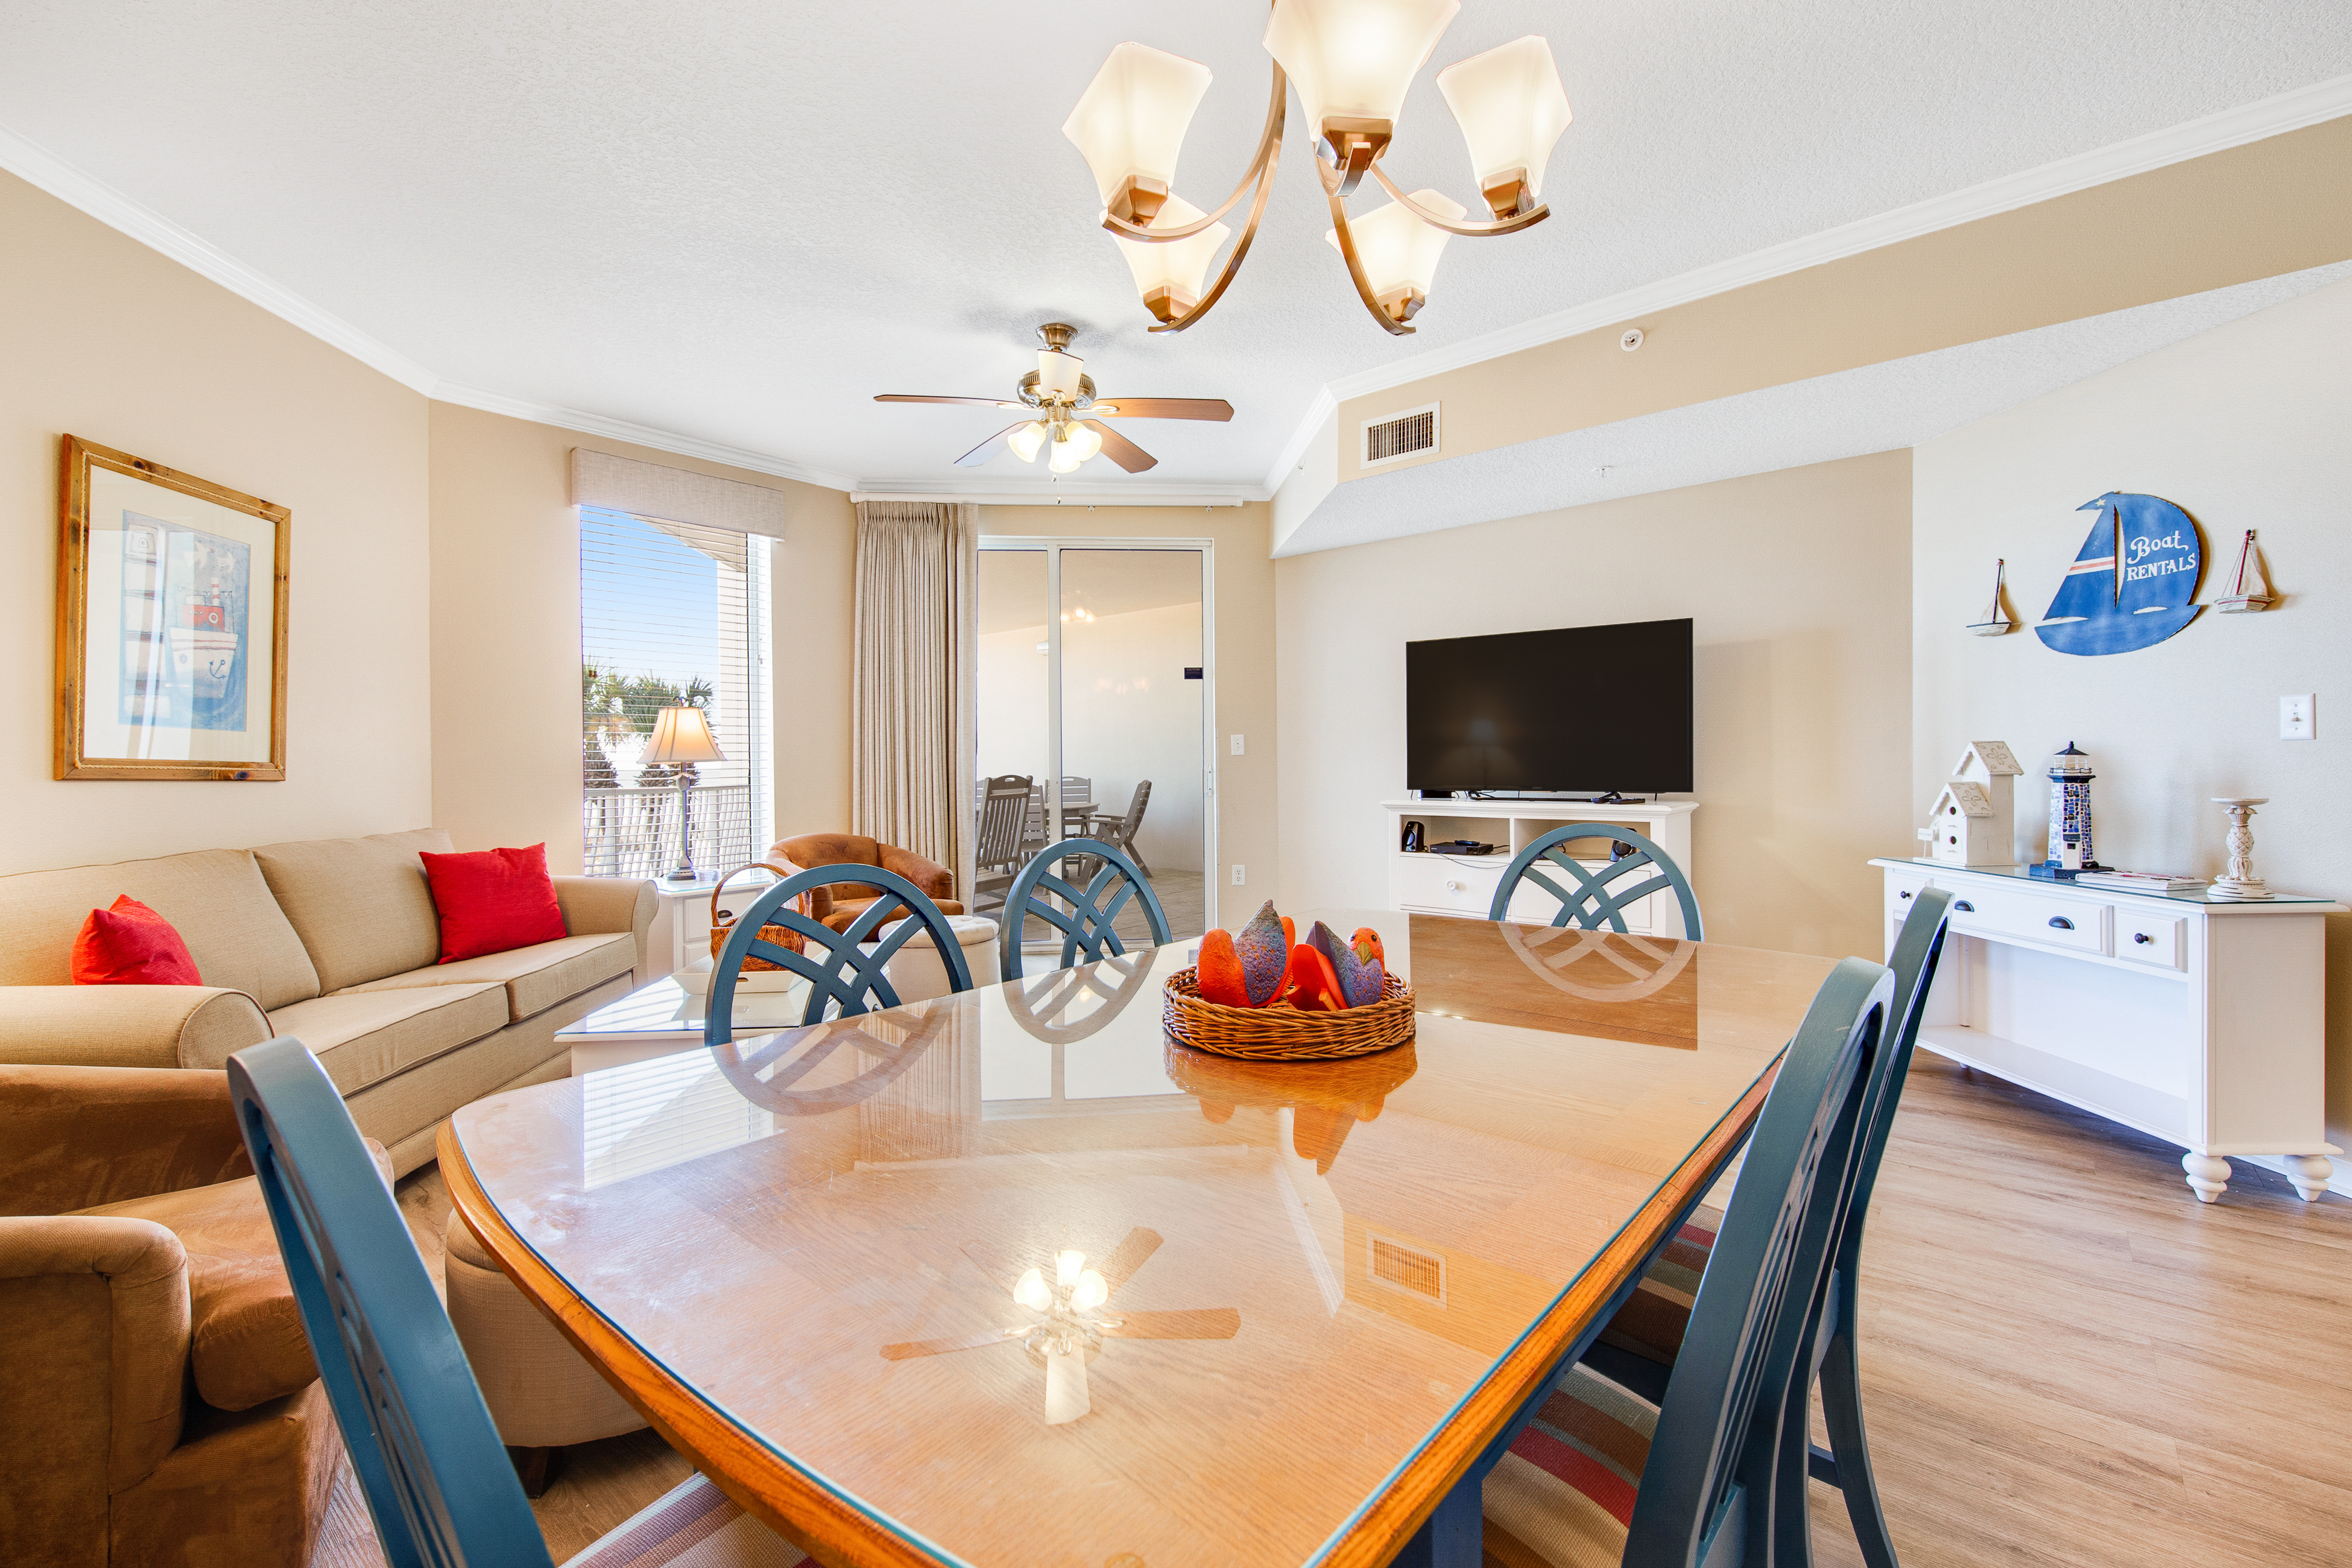 Dunes of Seagrove A205 Condo rental in Dunes of Seagrove in Highway 30-A Florida - #4